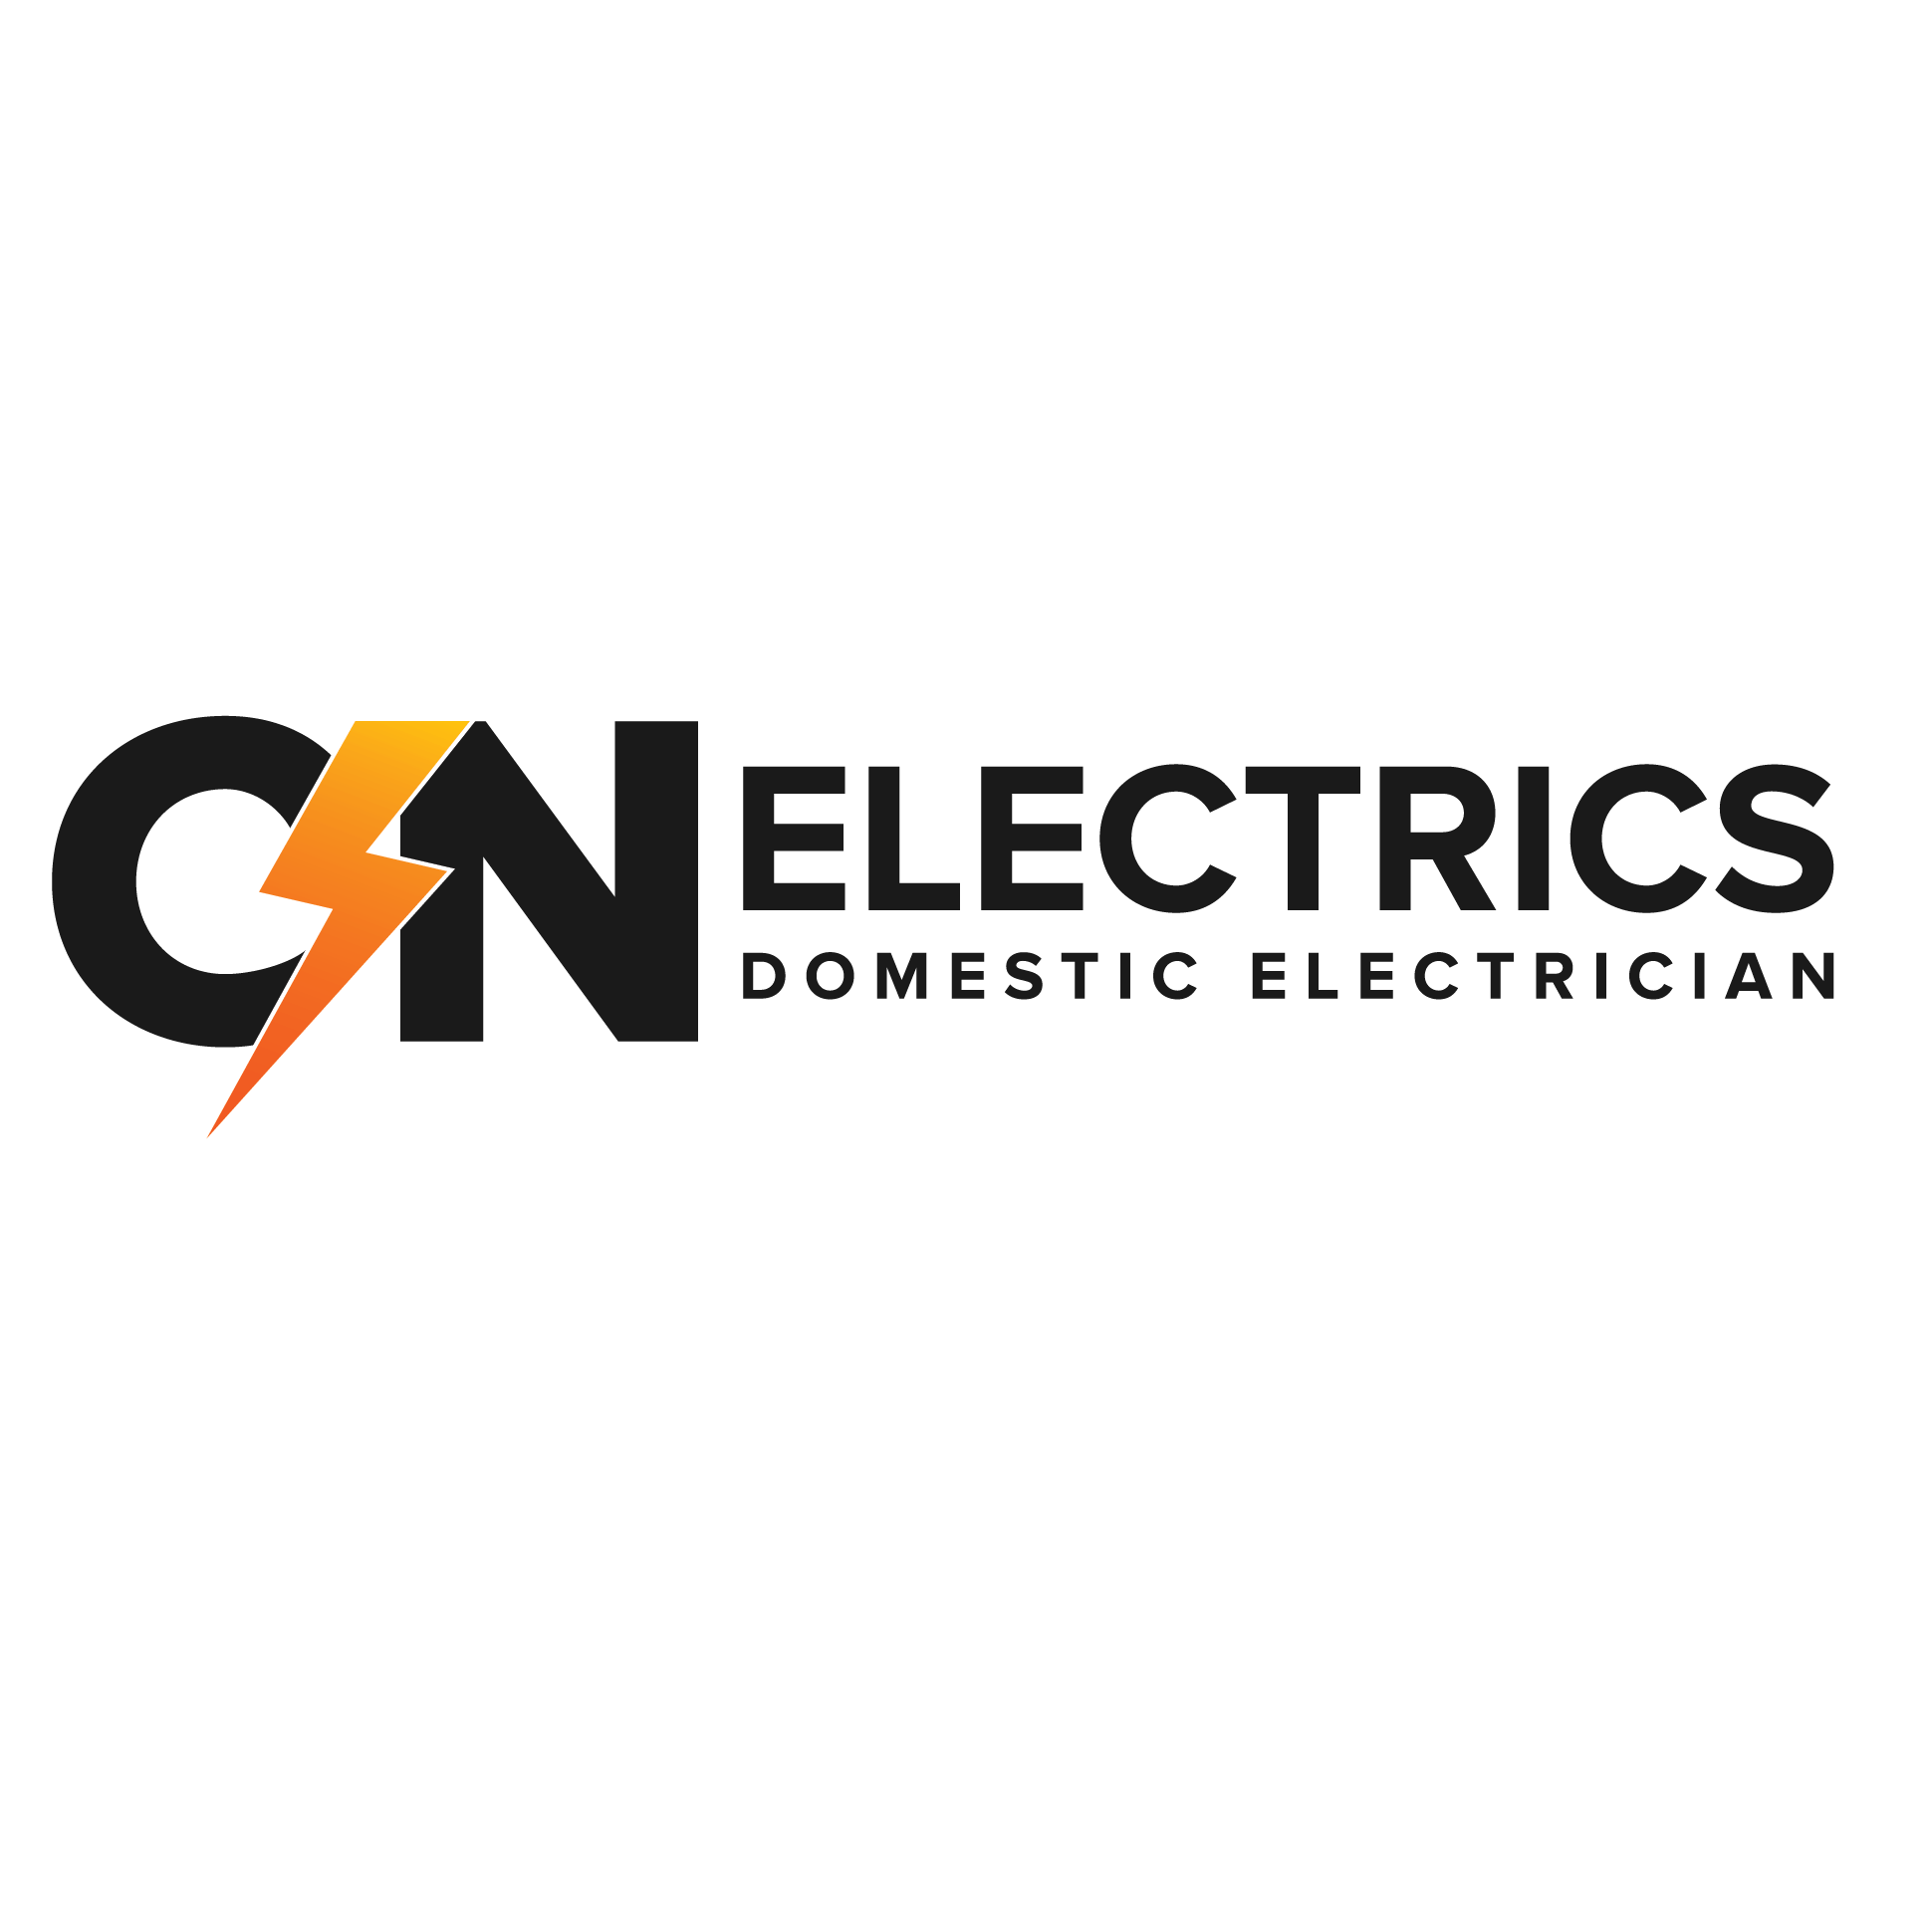 CN Electrics and home improvements